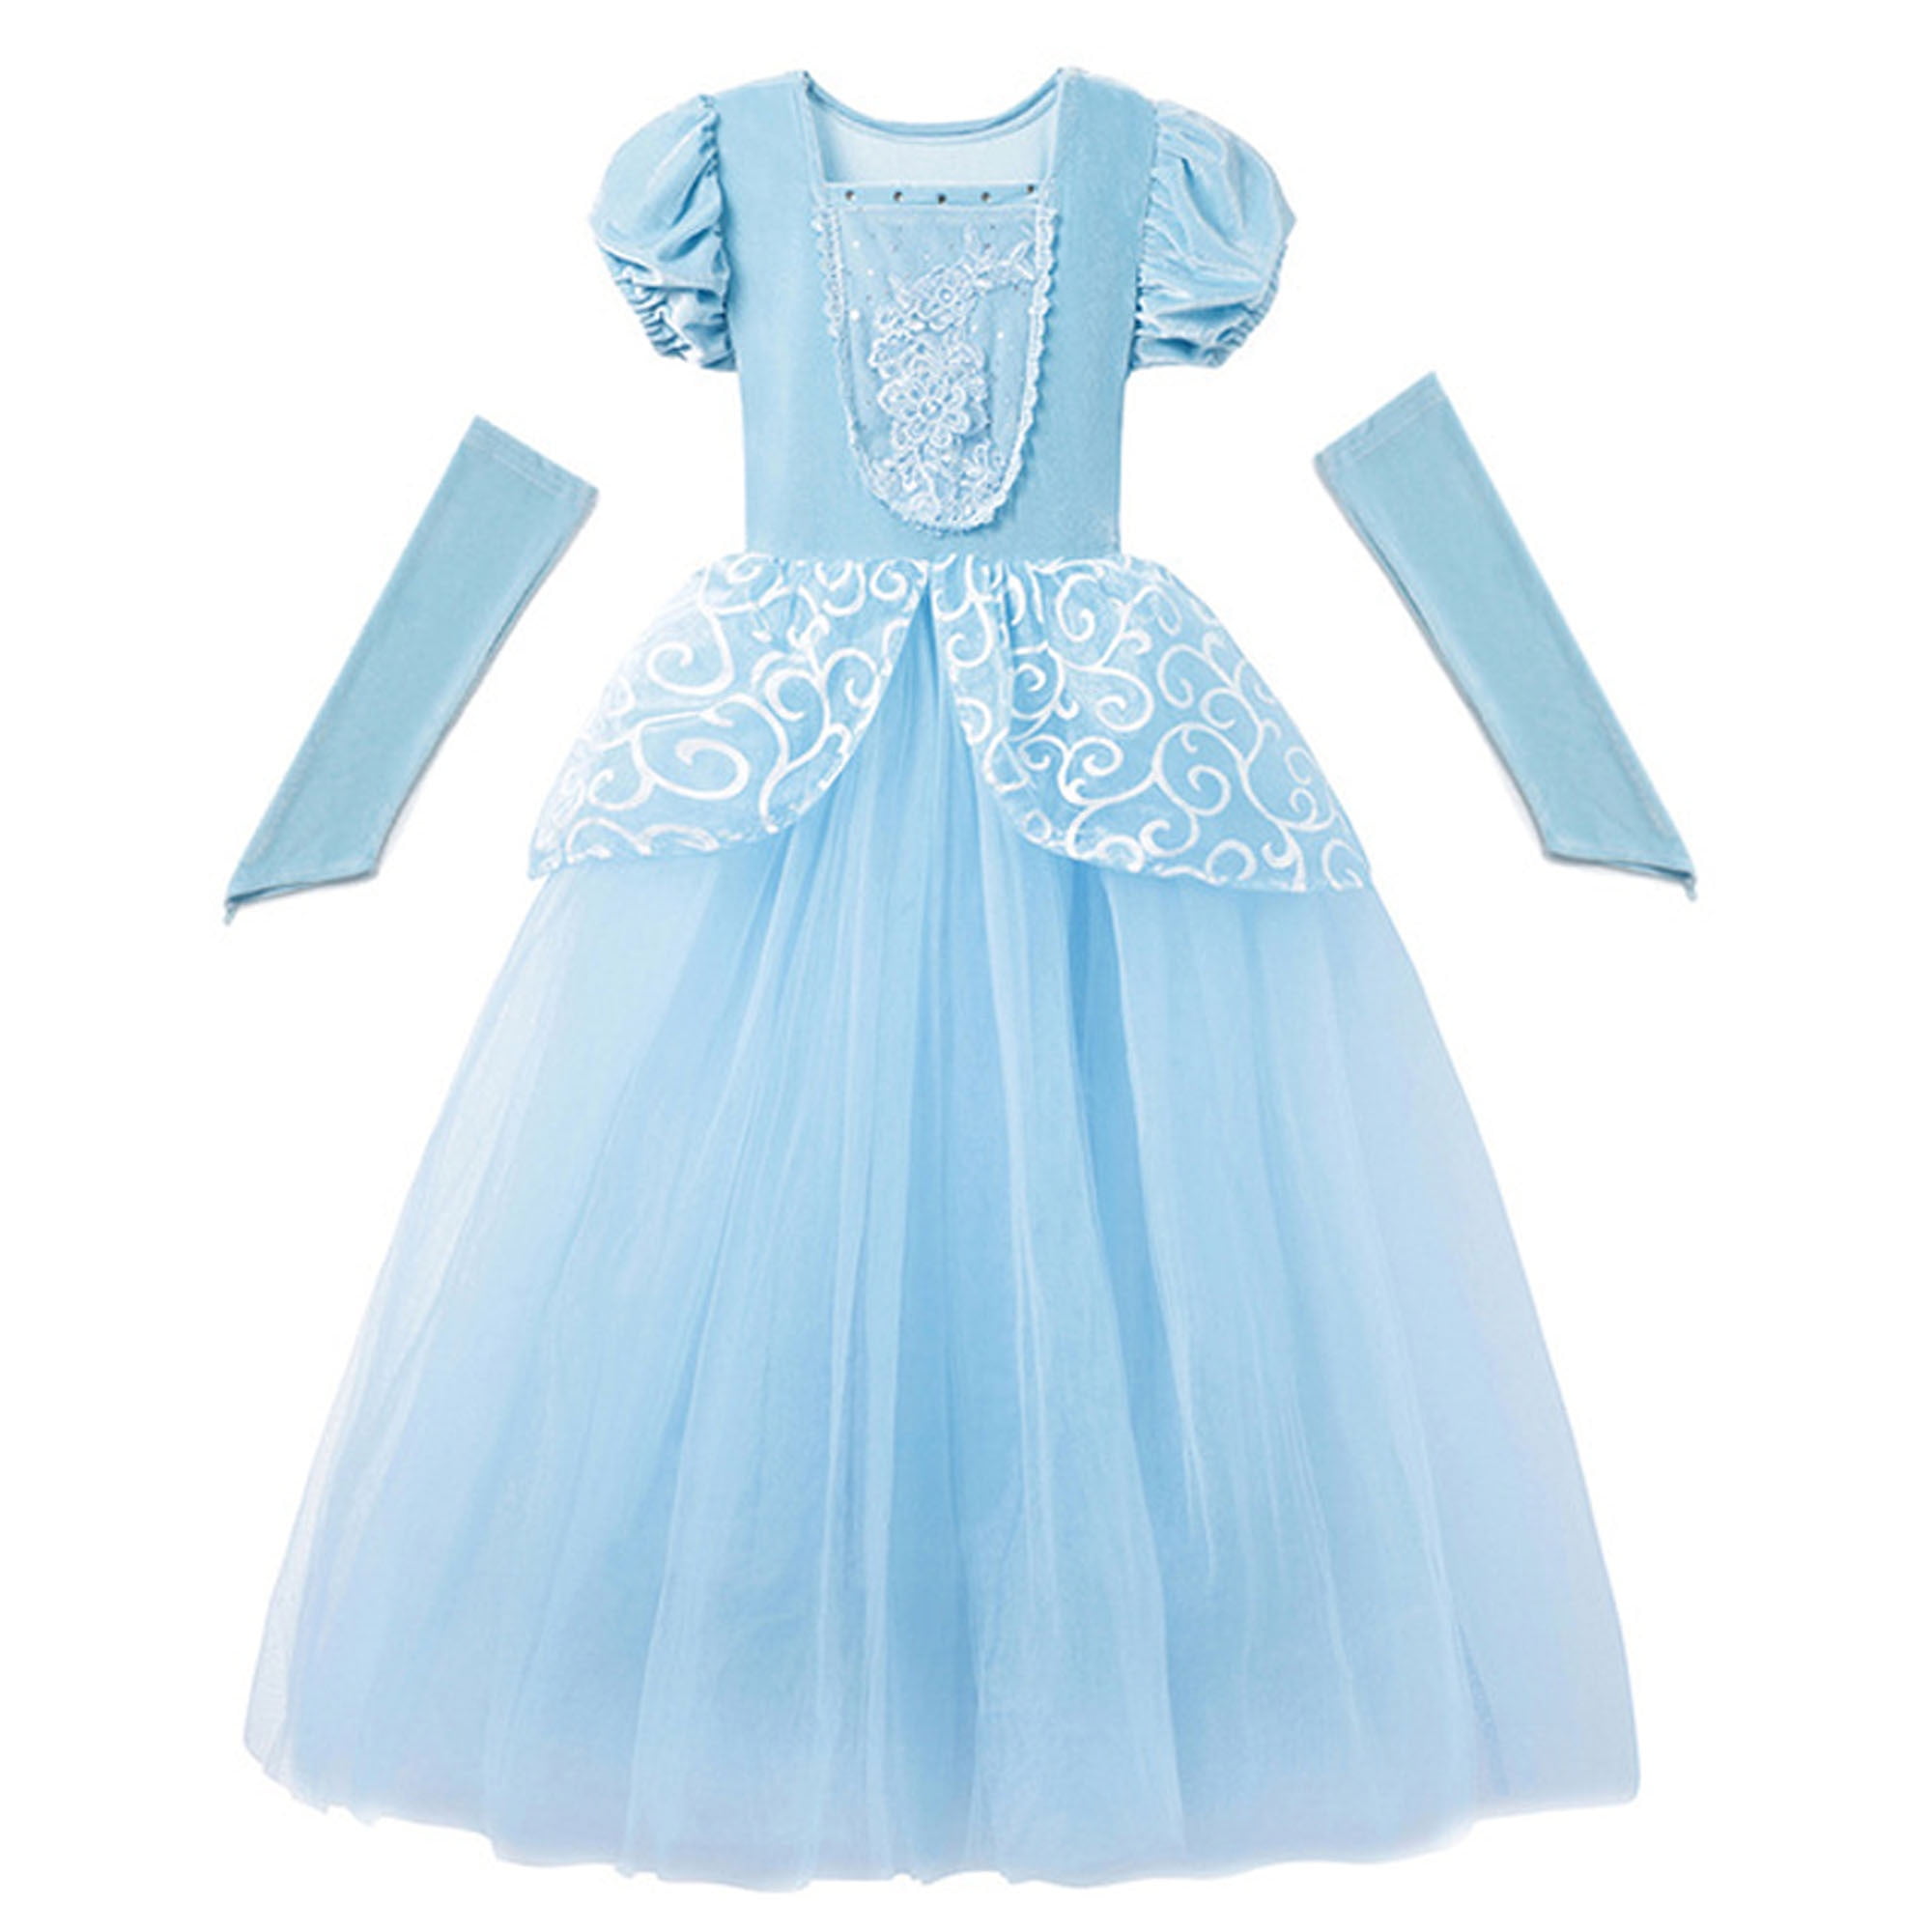 YUPPIN Girls Princess Dress Costume - Luxury Sequin Birthday Party Dress Up  Girls with accessories